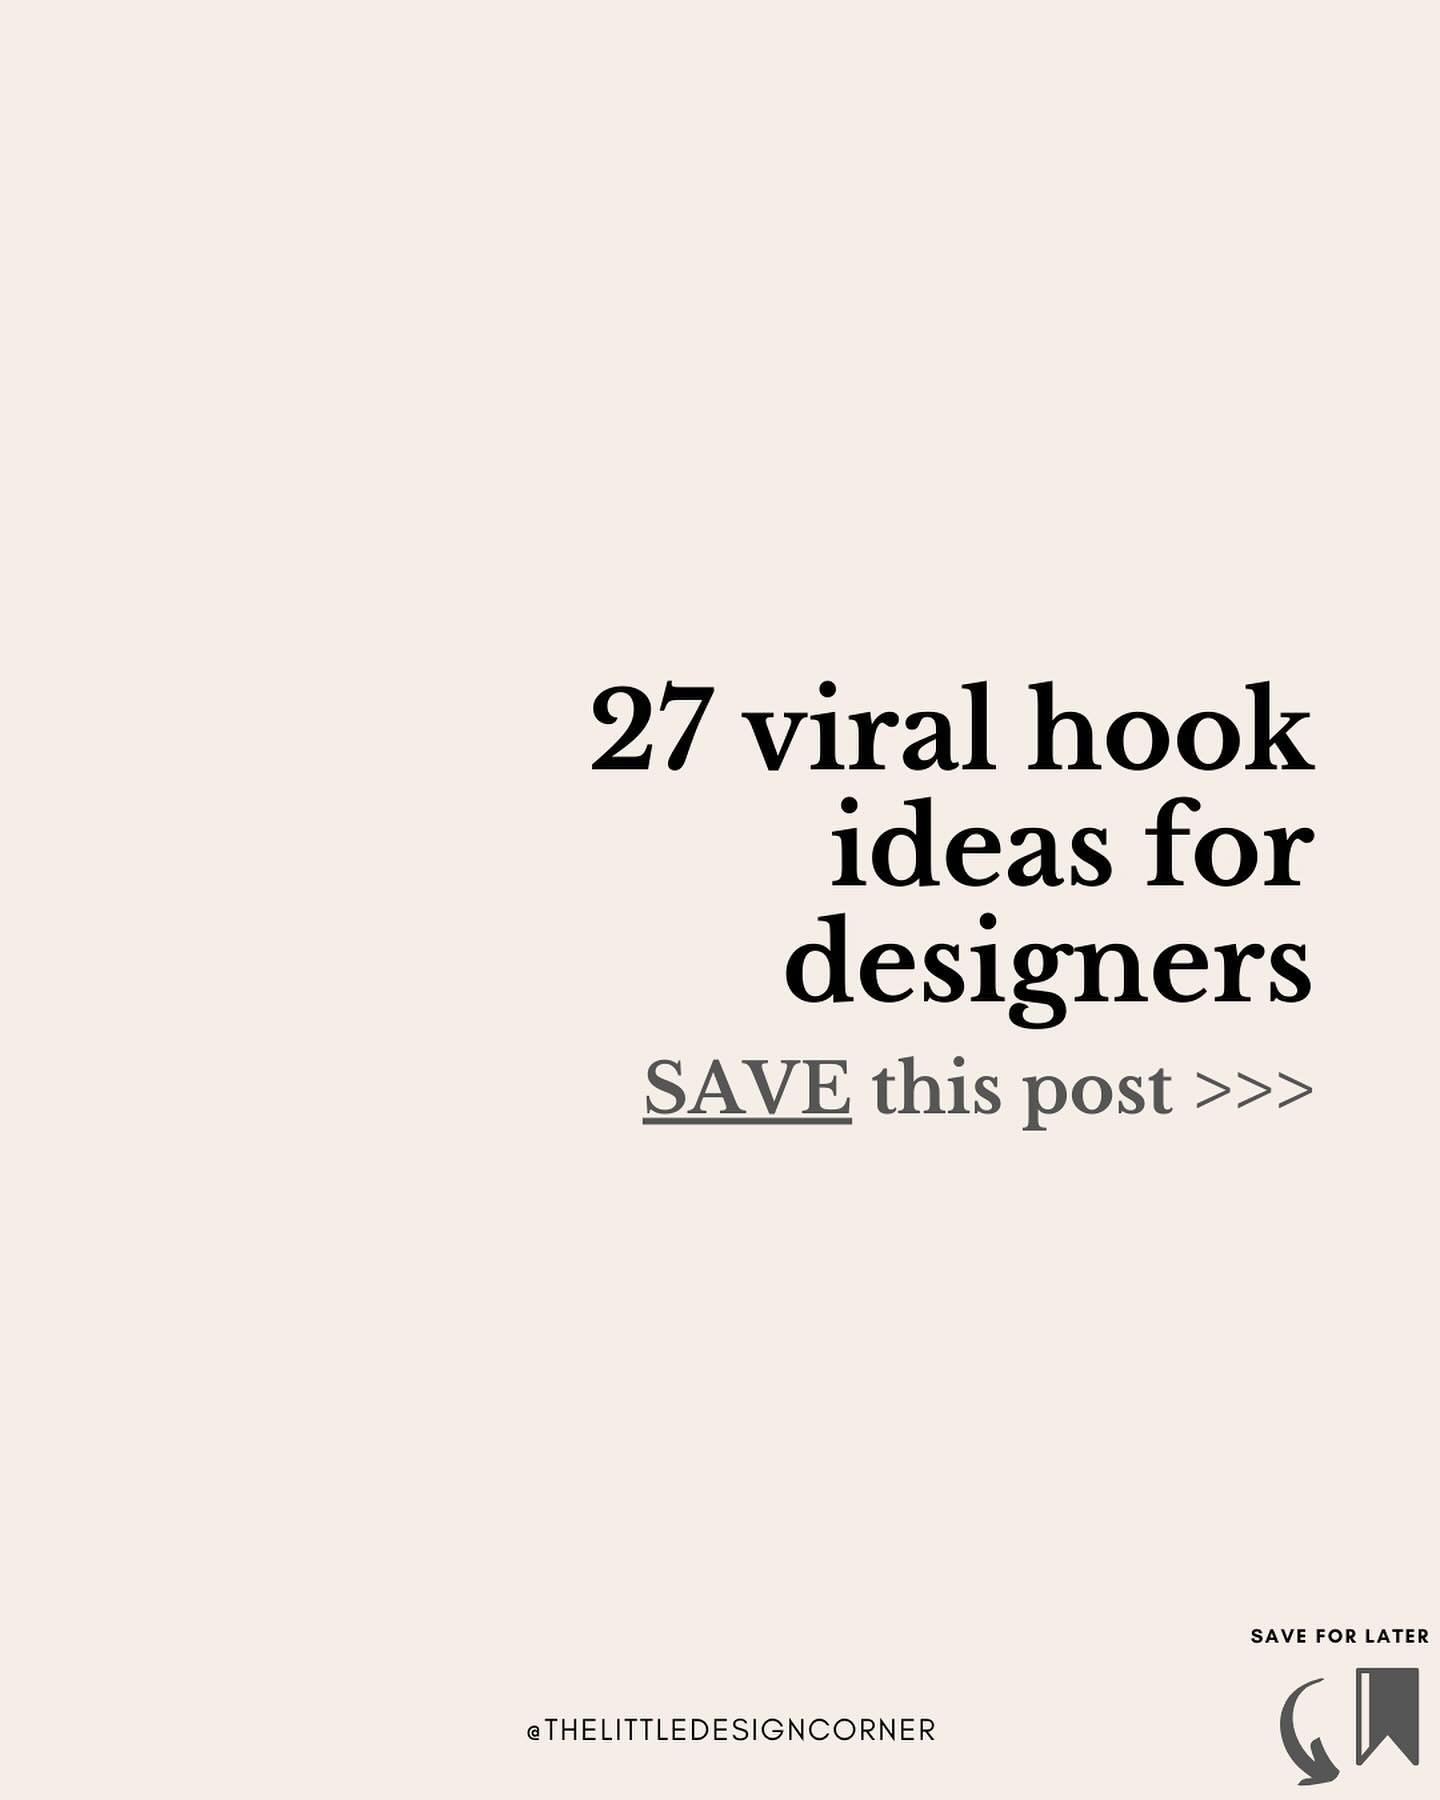 💾 SAVE these high performing hook ideas ⬇️

The hook is the attention grabbing part of your content.

You only have a few seconds to capture the attention of your audience and a strong hook immediately engages your audience and keeps them watching.
